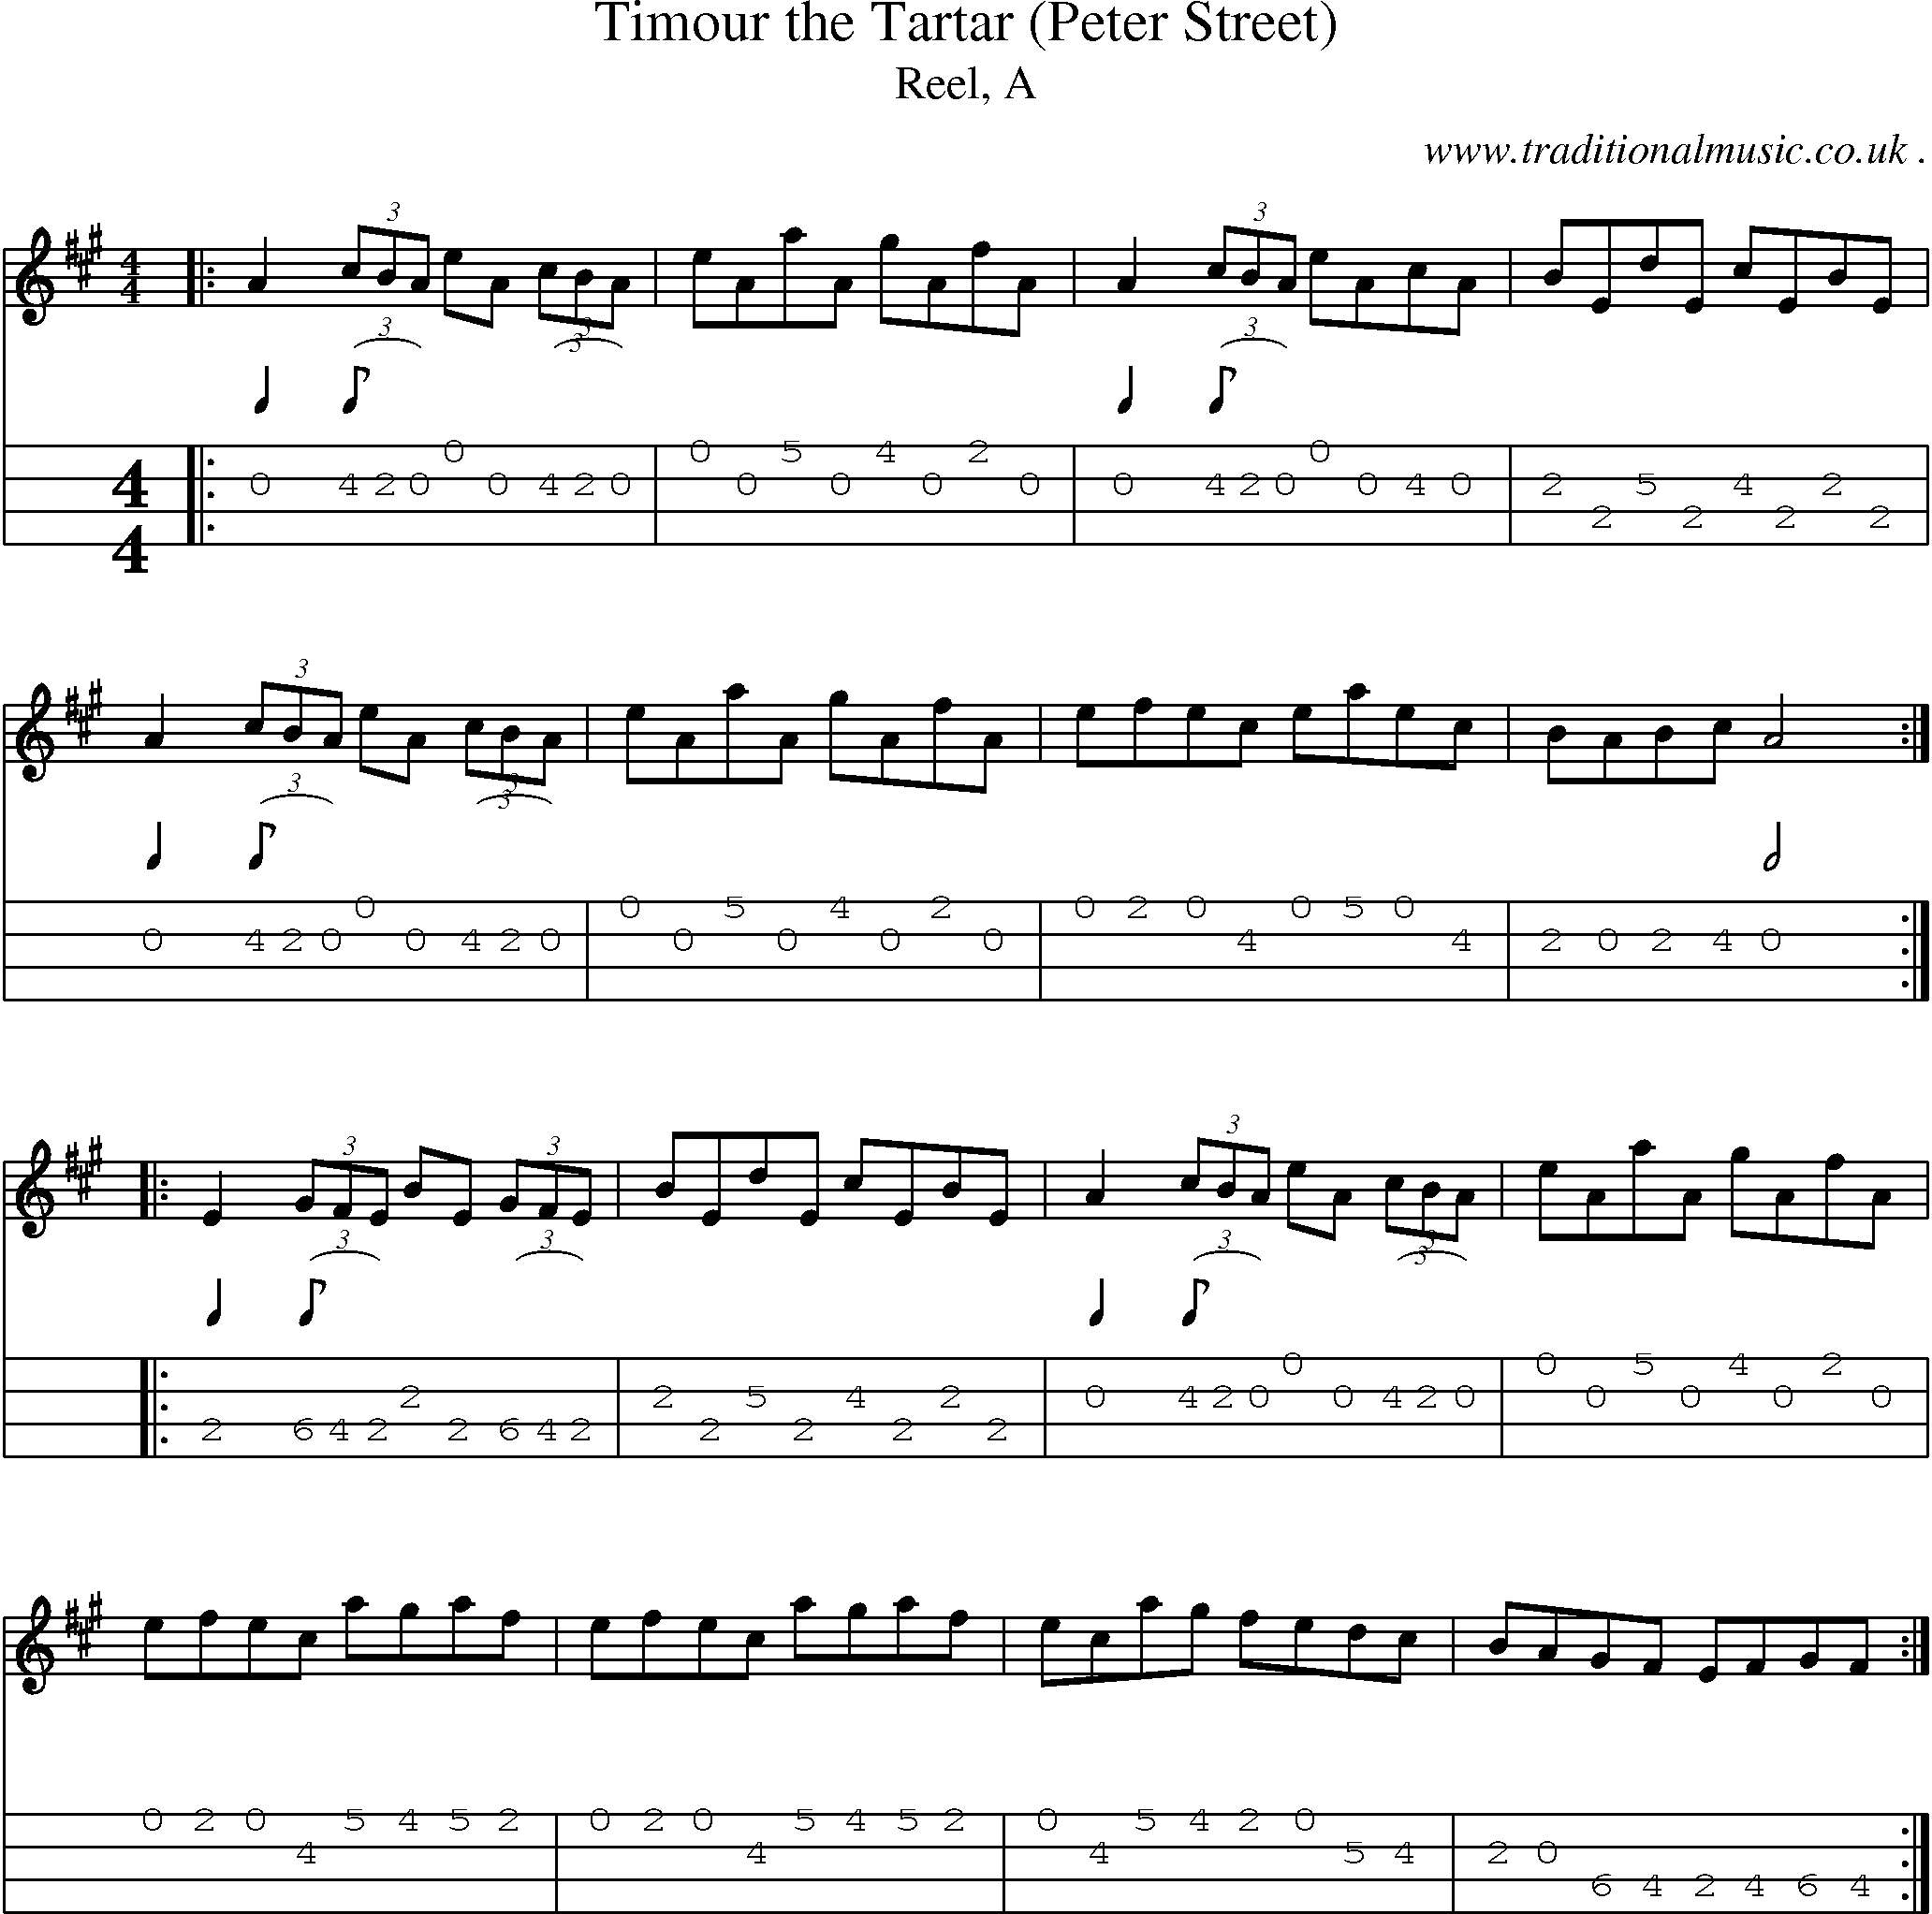 Sheet-music  score, Chords and Mandolin Tabs for Timour The Tartar Peter Street